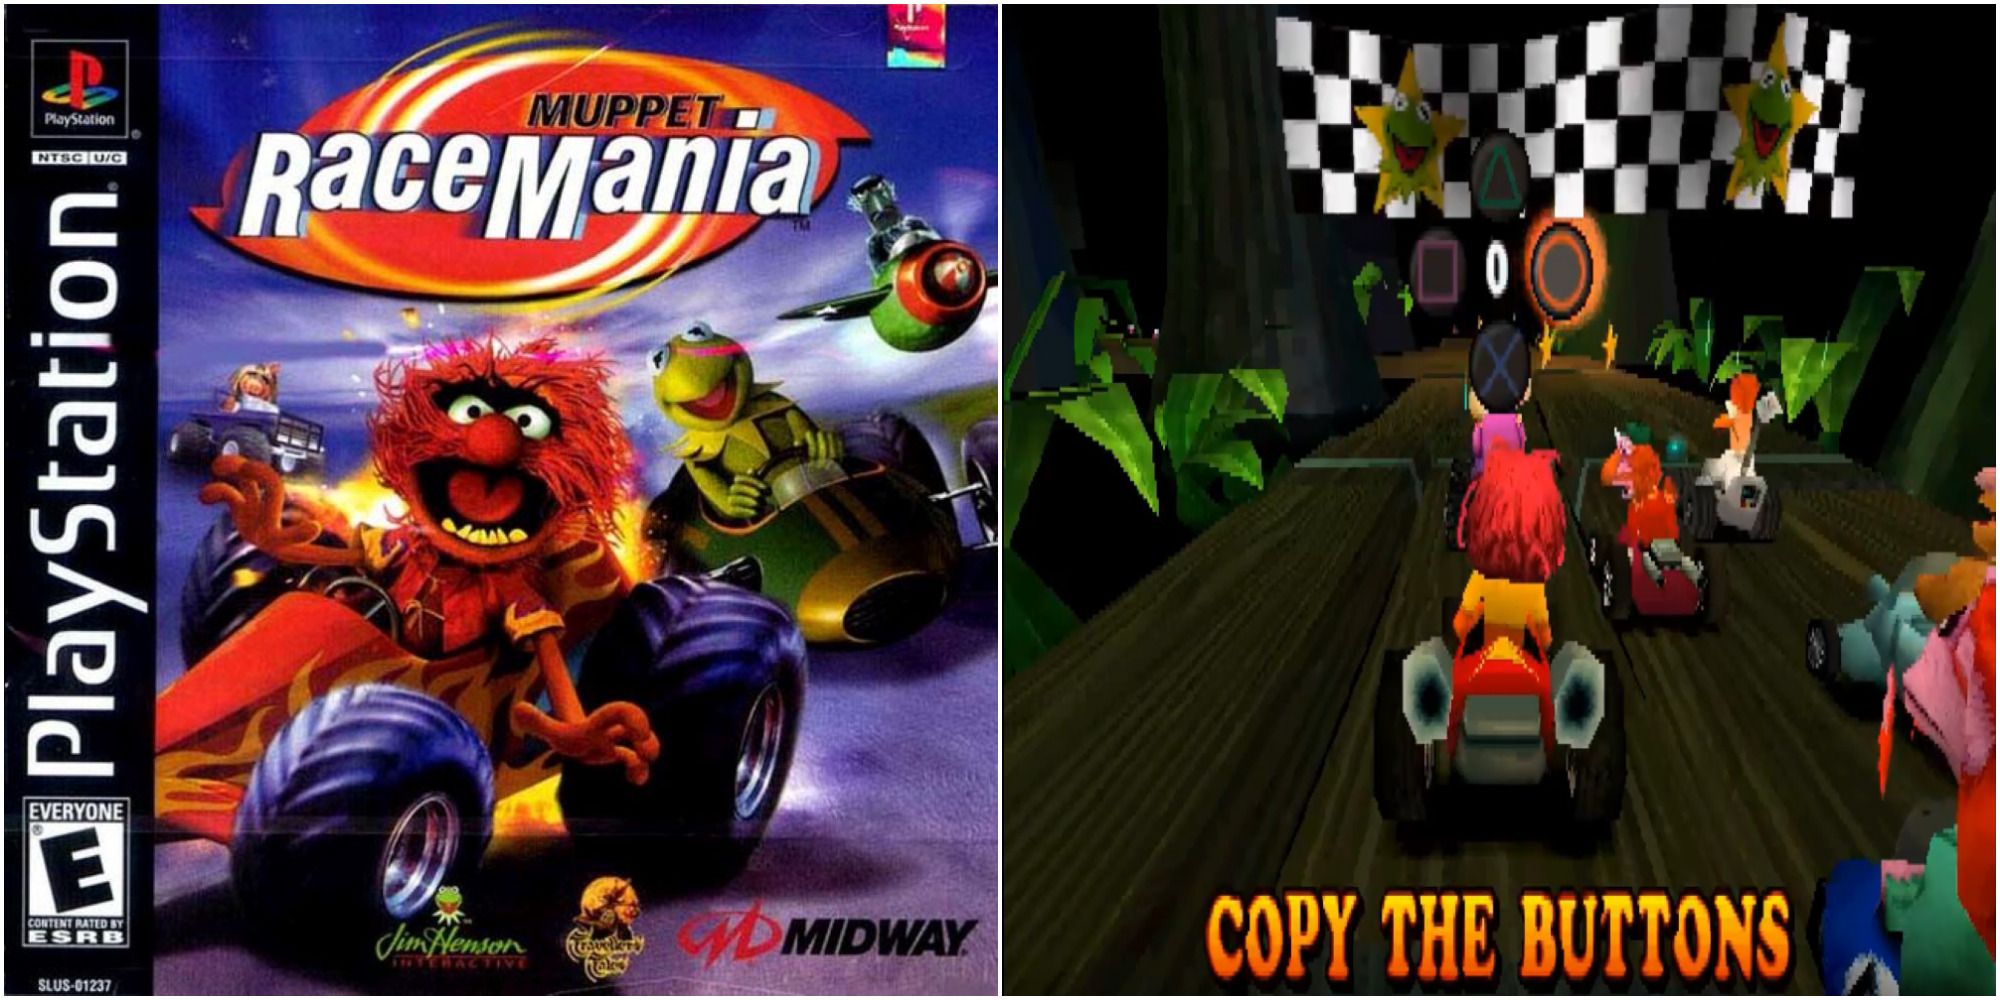 Split image Muppet RaceMania Cover with Animal, Kermit the frog, and Sam the Eagle kart racing. Gameplay of Animal starting race and copying button inputs.